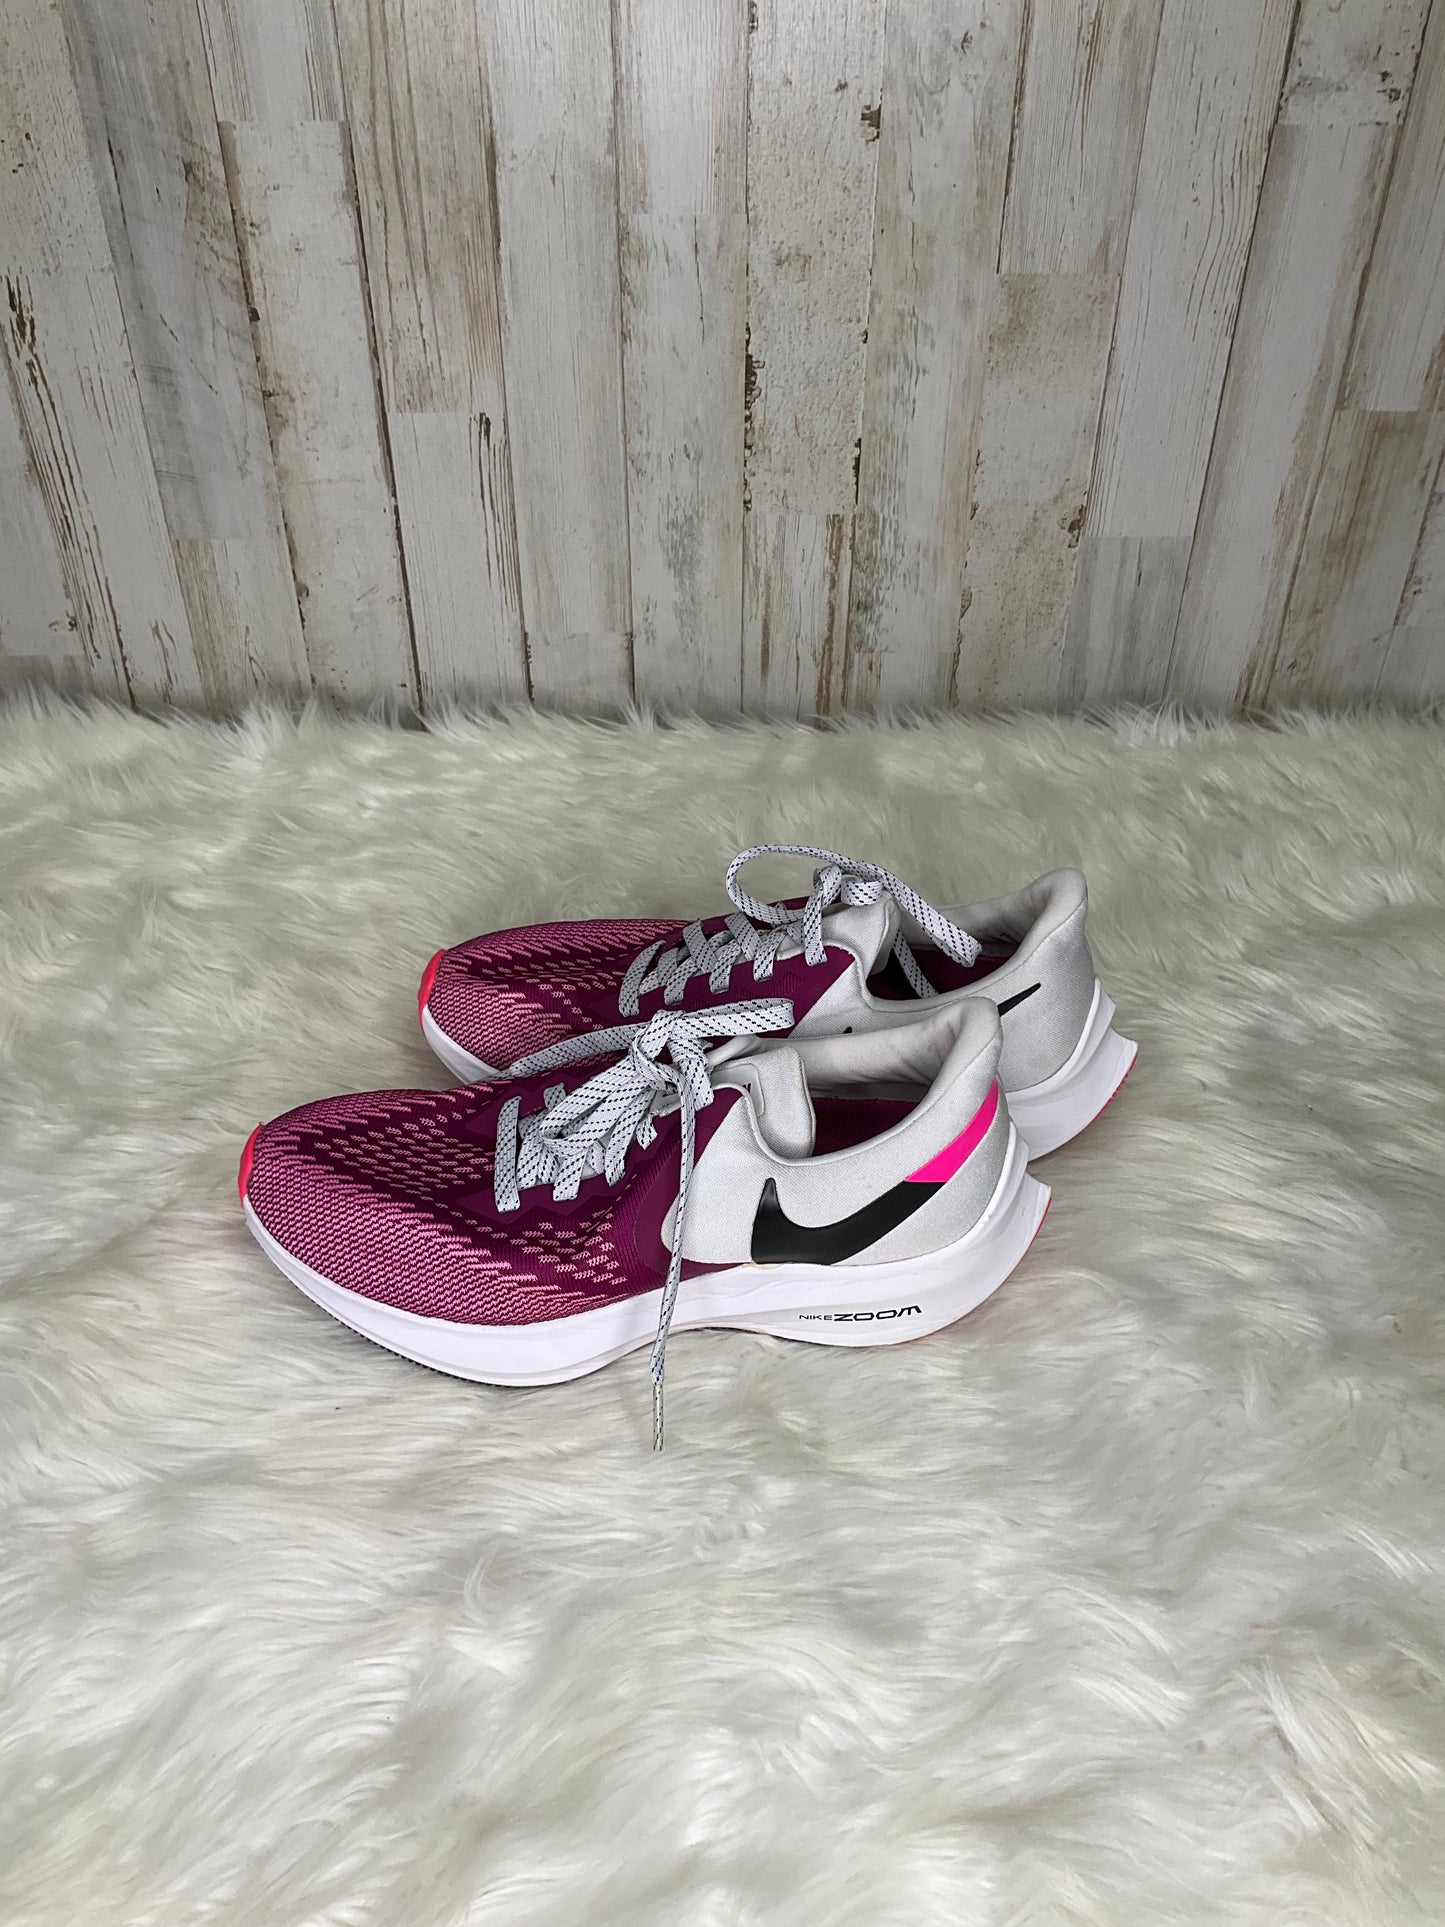 Shoes Athletic By Nike  Size: 7.5